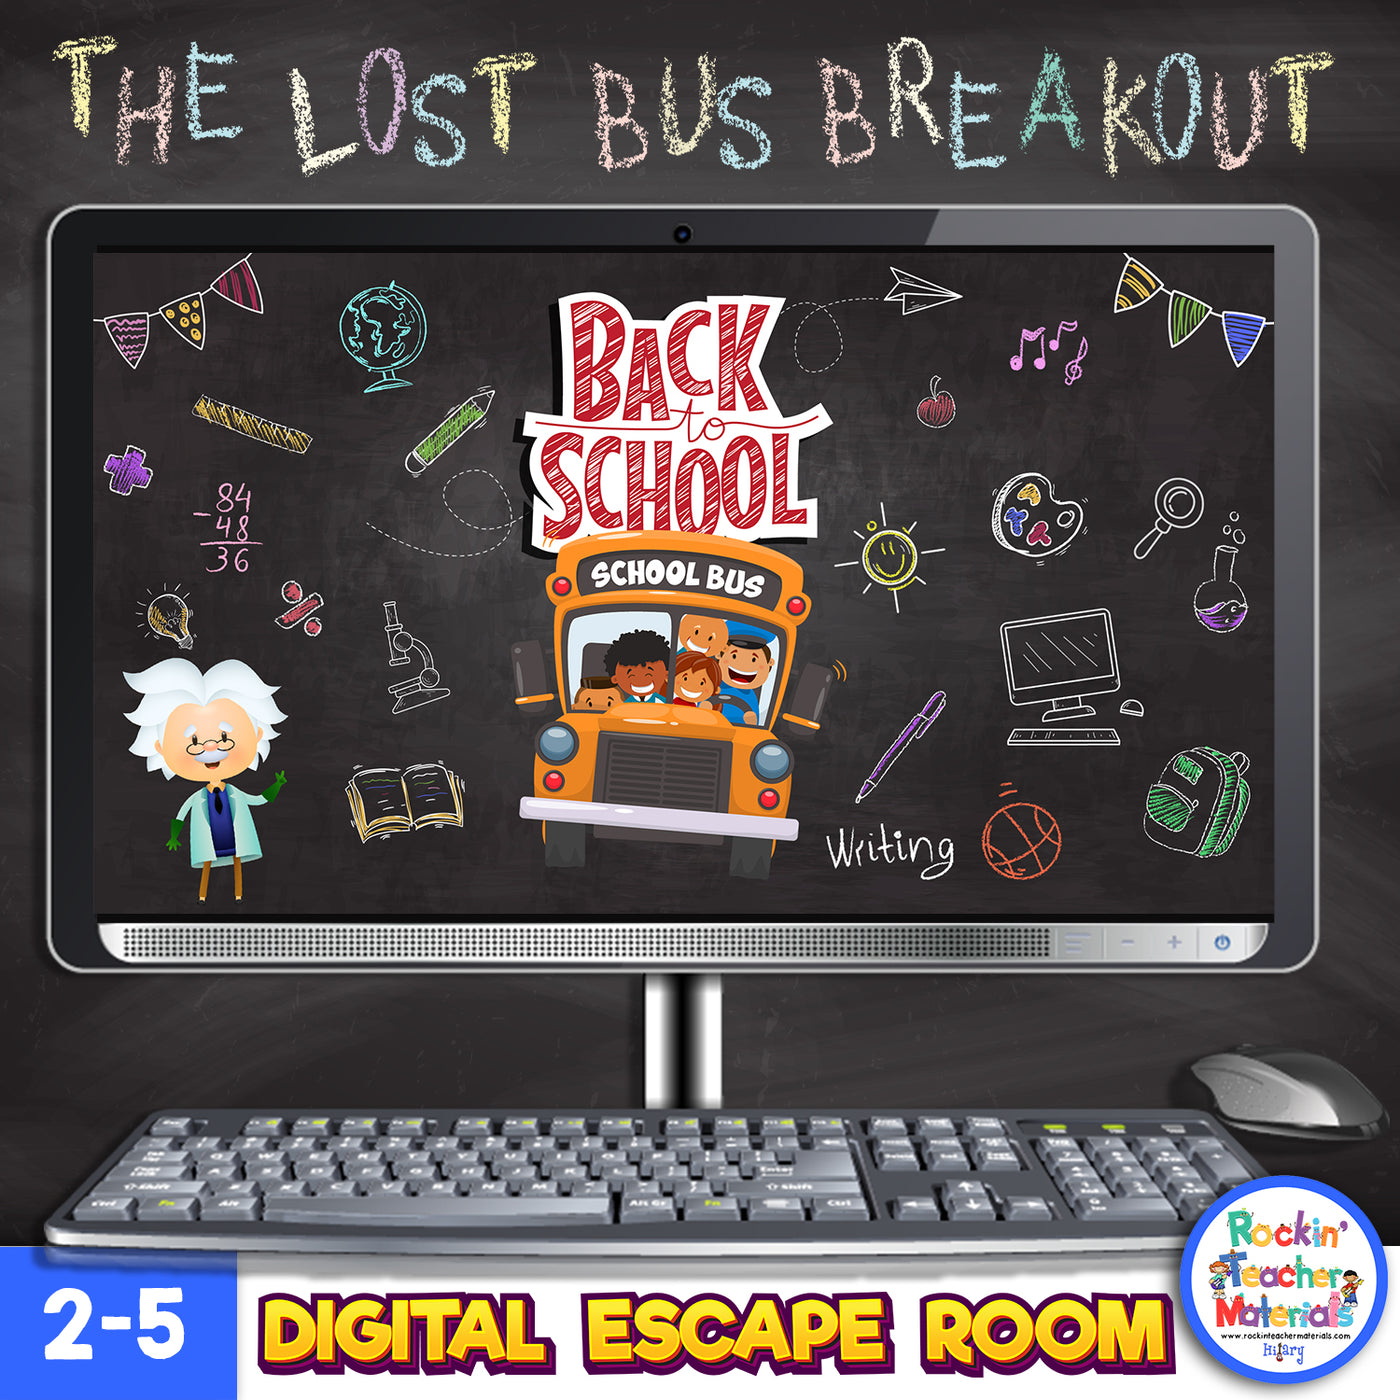 Back to School Digital Escape Room for Distance Learning - Character Traits